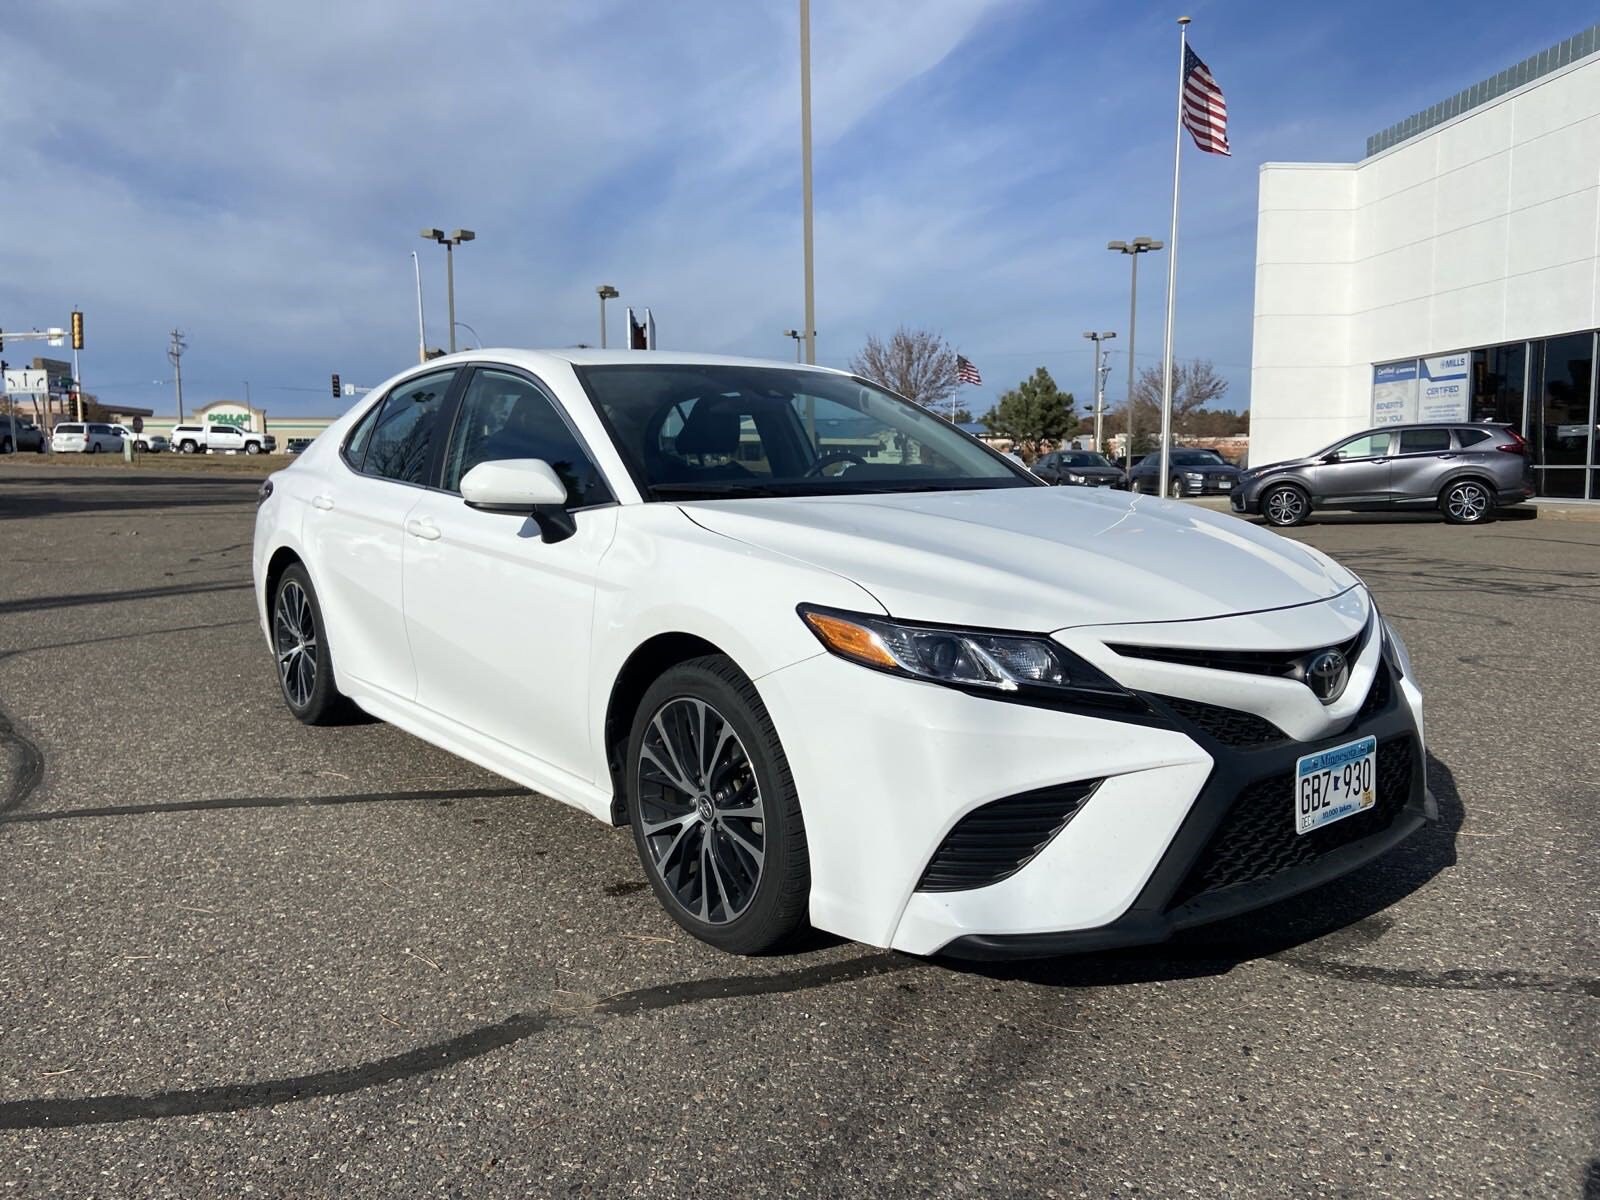 Used 2020 Toyota Camry SE with VIN 4T1G11AK6LU927515 for sale in Baxter, Minnesota